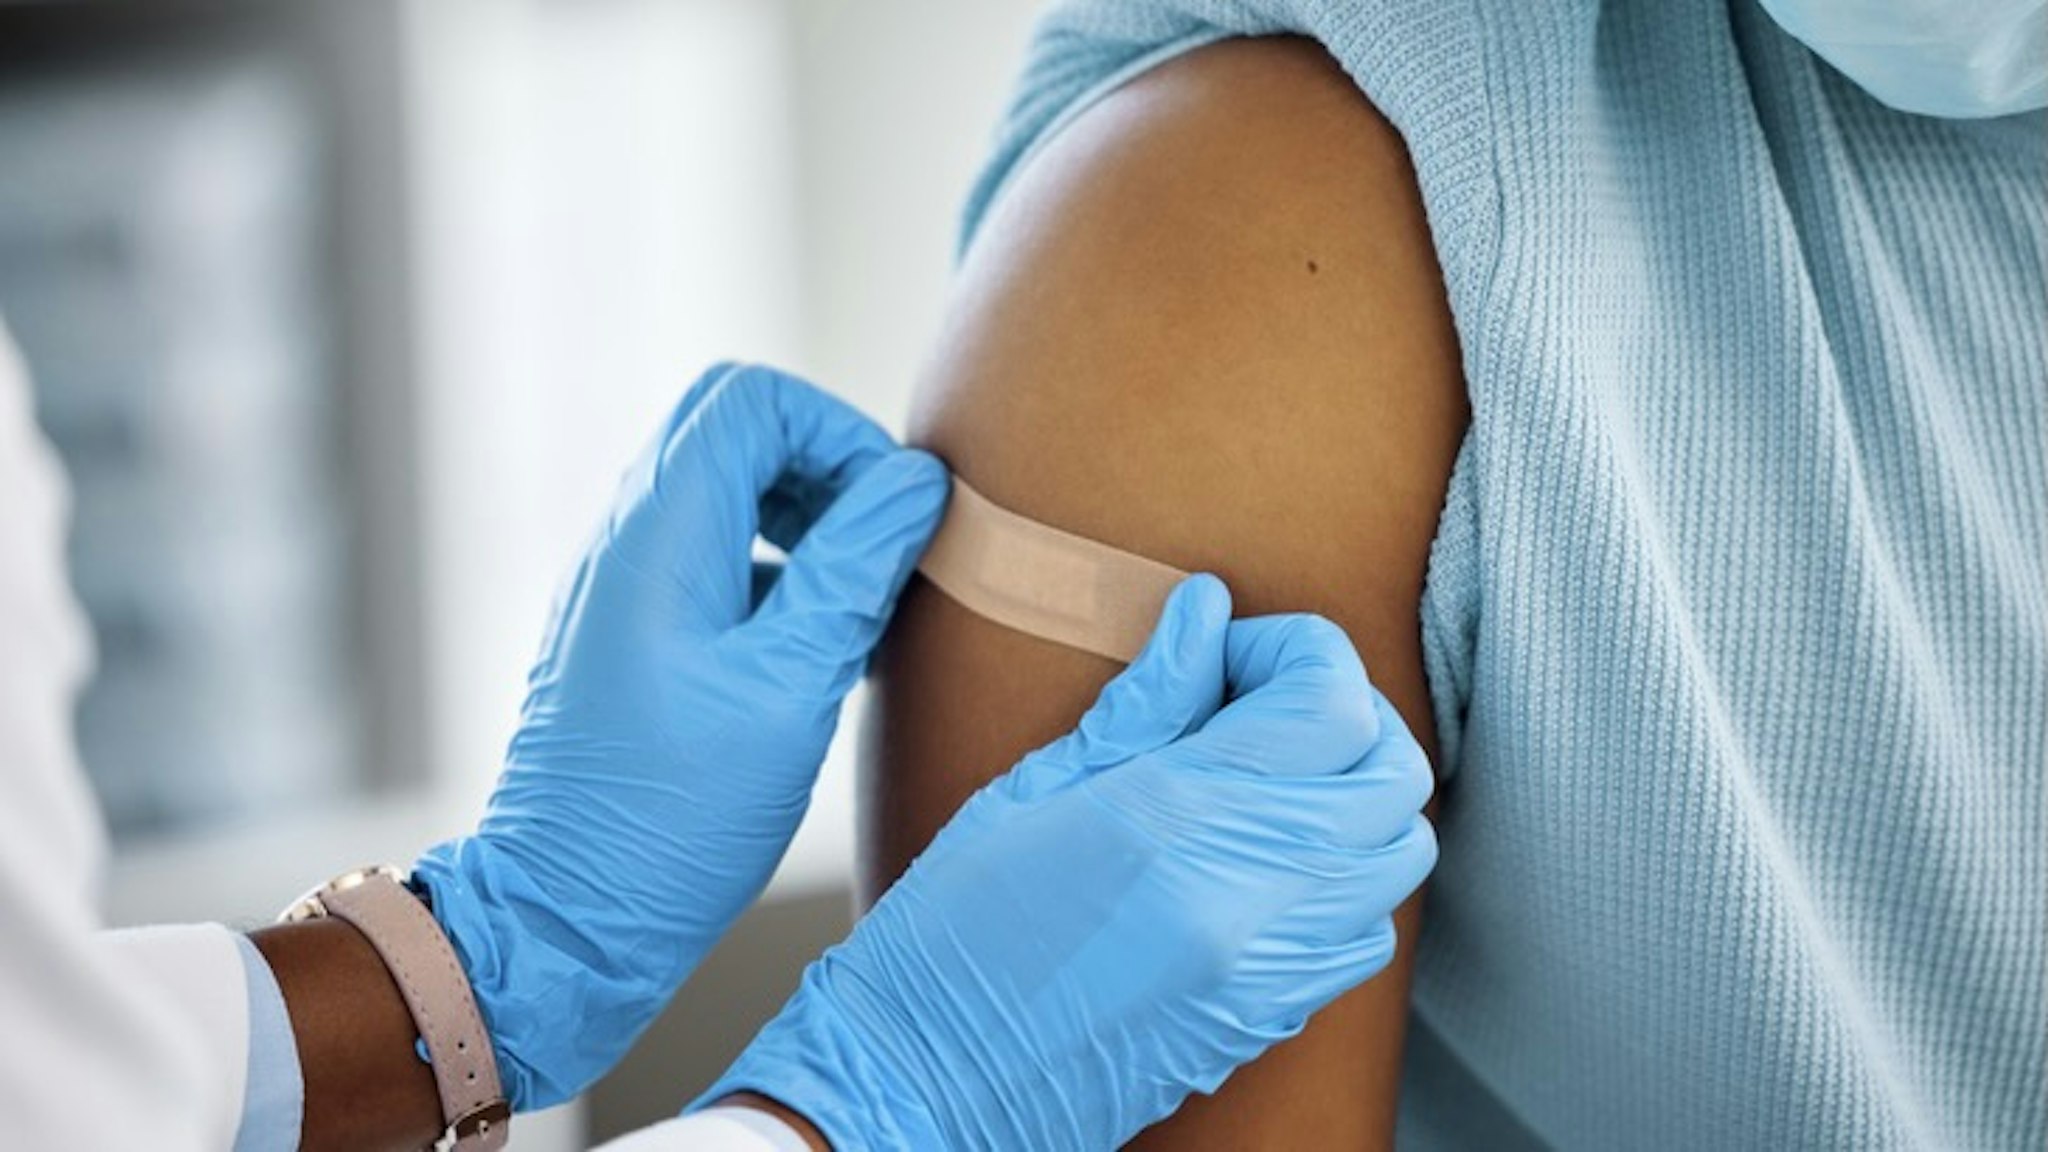 Shot of a doctor applying a plaster to her patients arm - stock photo Just leave this on for an hour PeopleImages via Getty Images